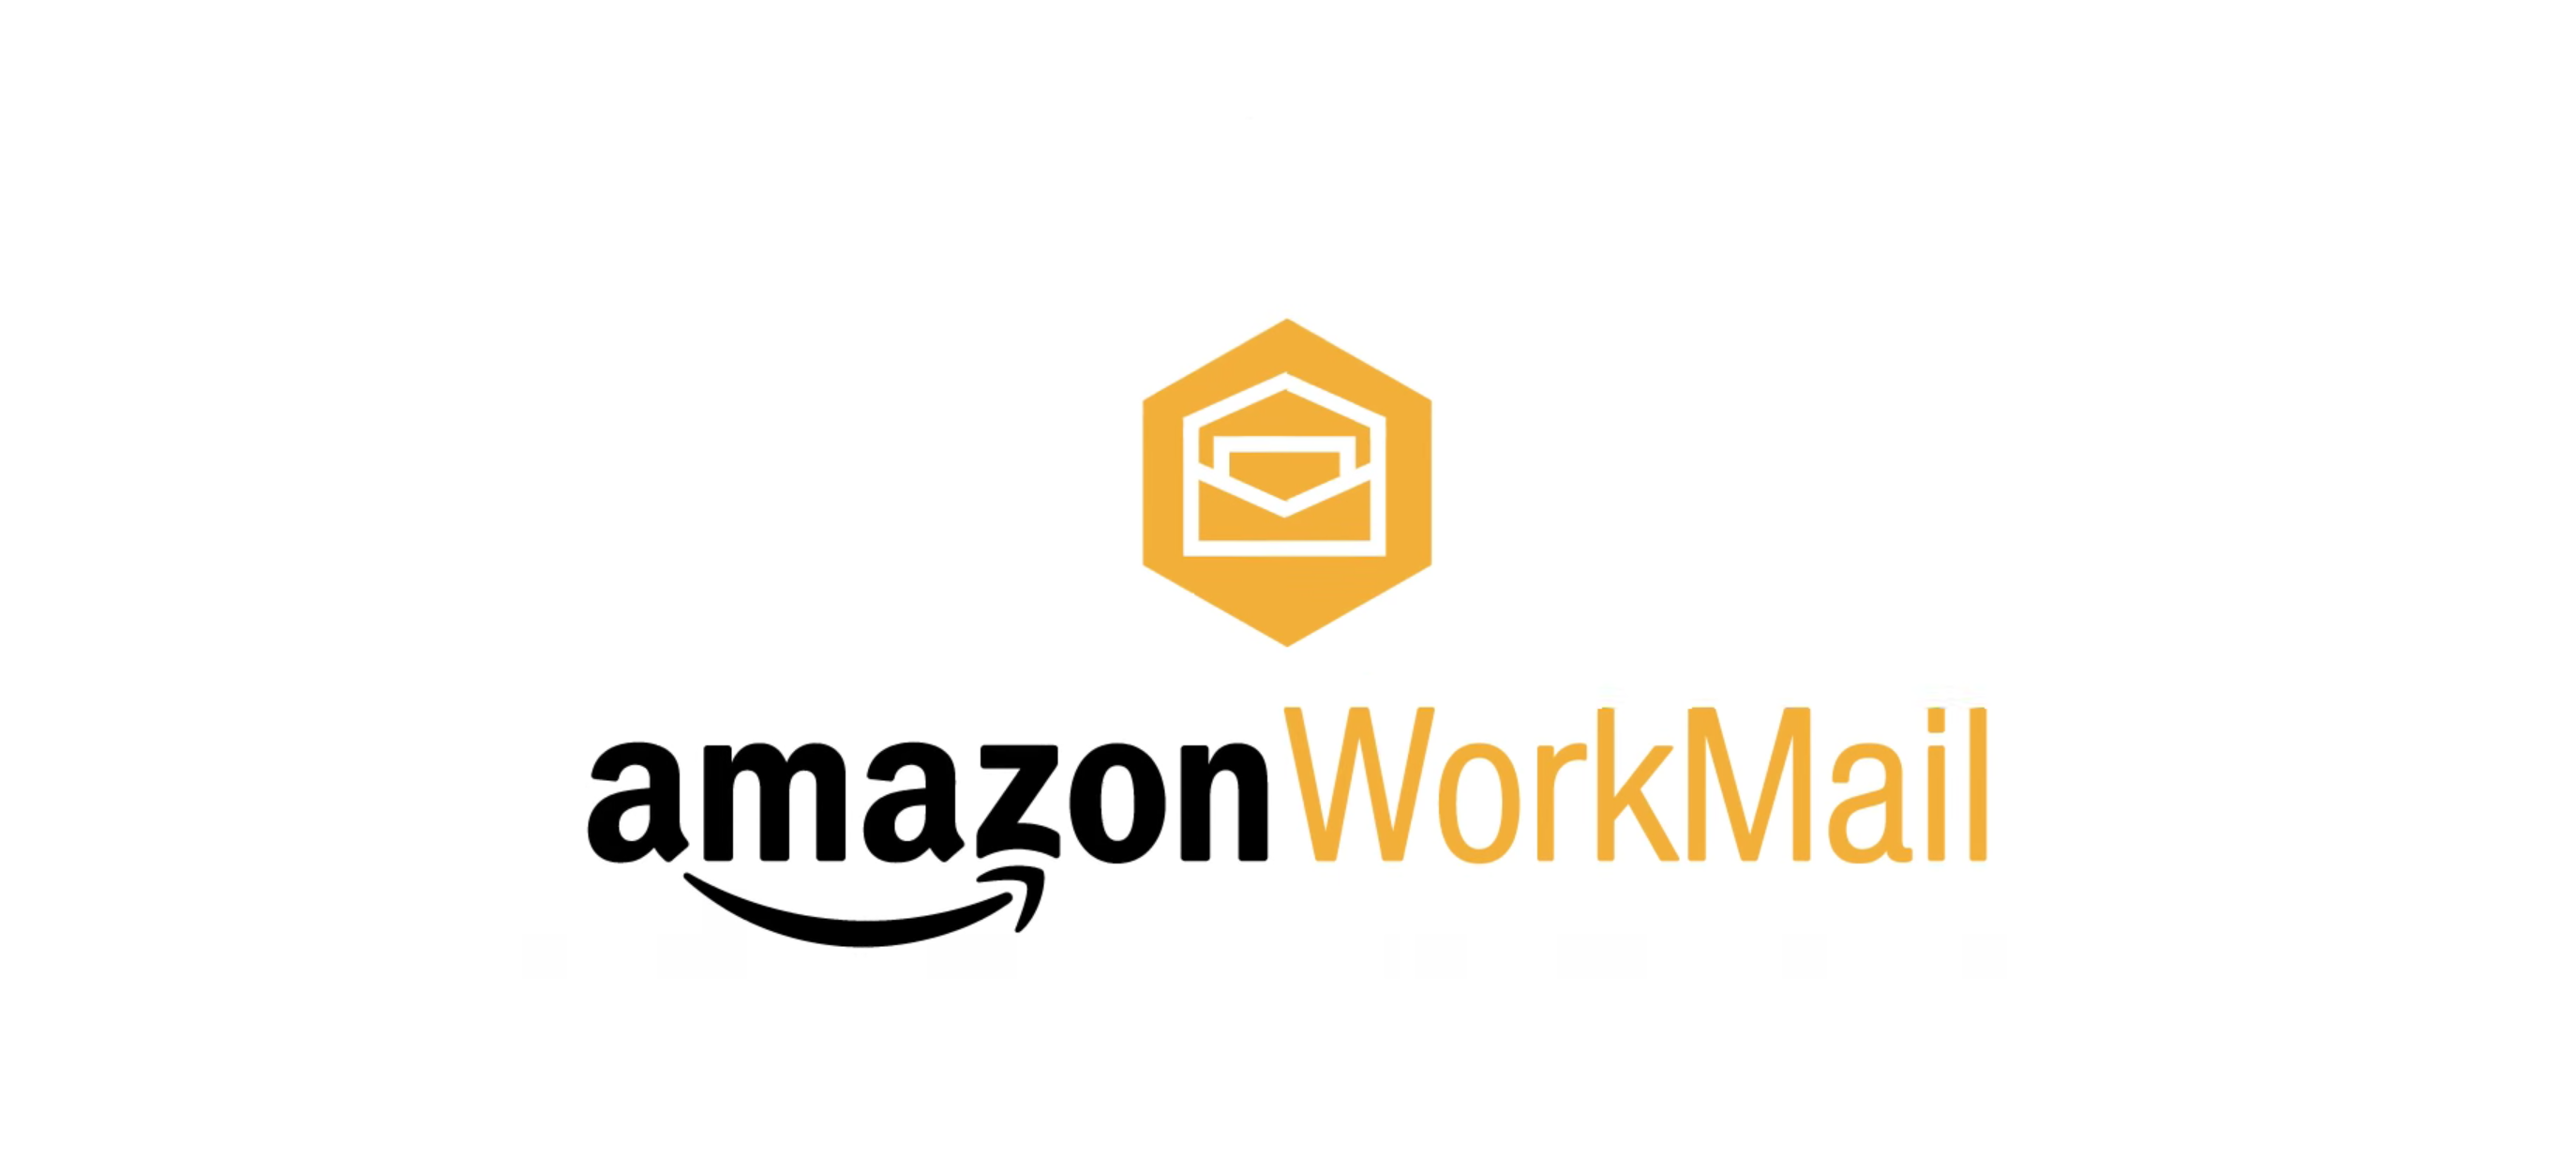 Amazon's Email And Calendaring Service, Amazon WorkMail, Exits Preview |  TechCrunch